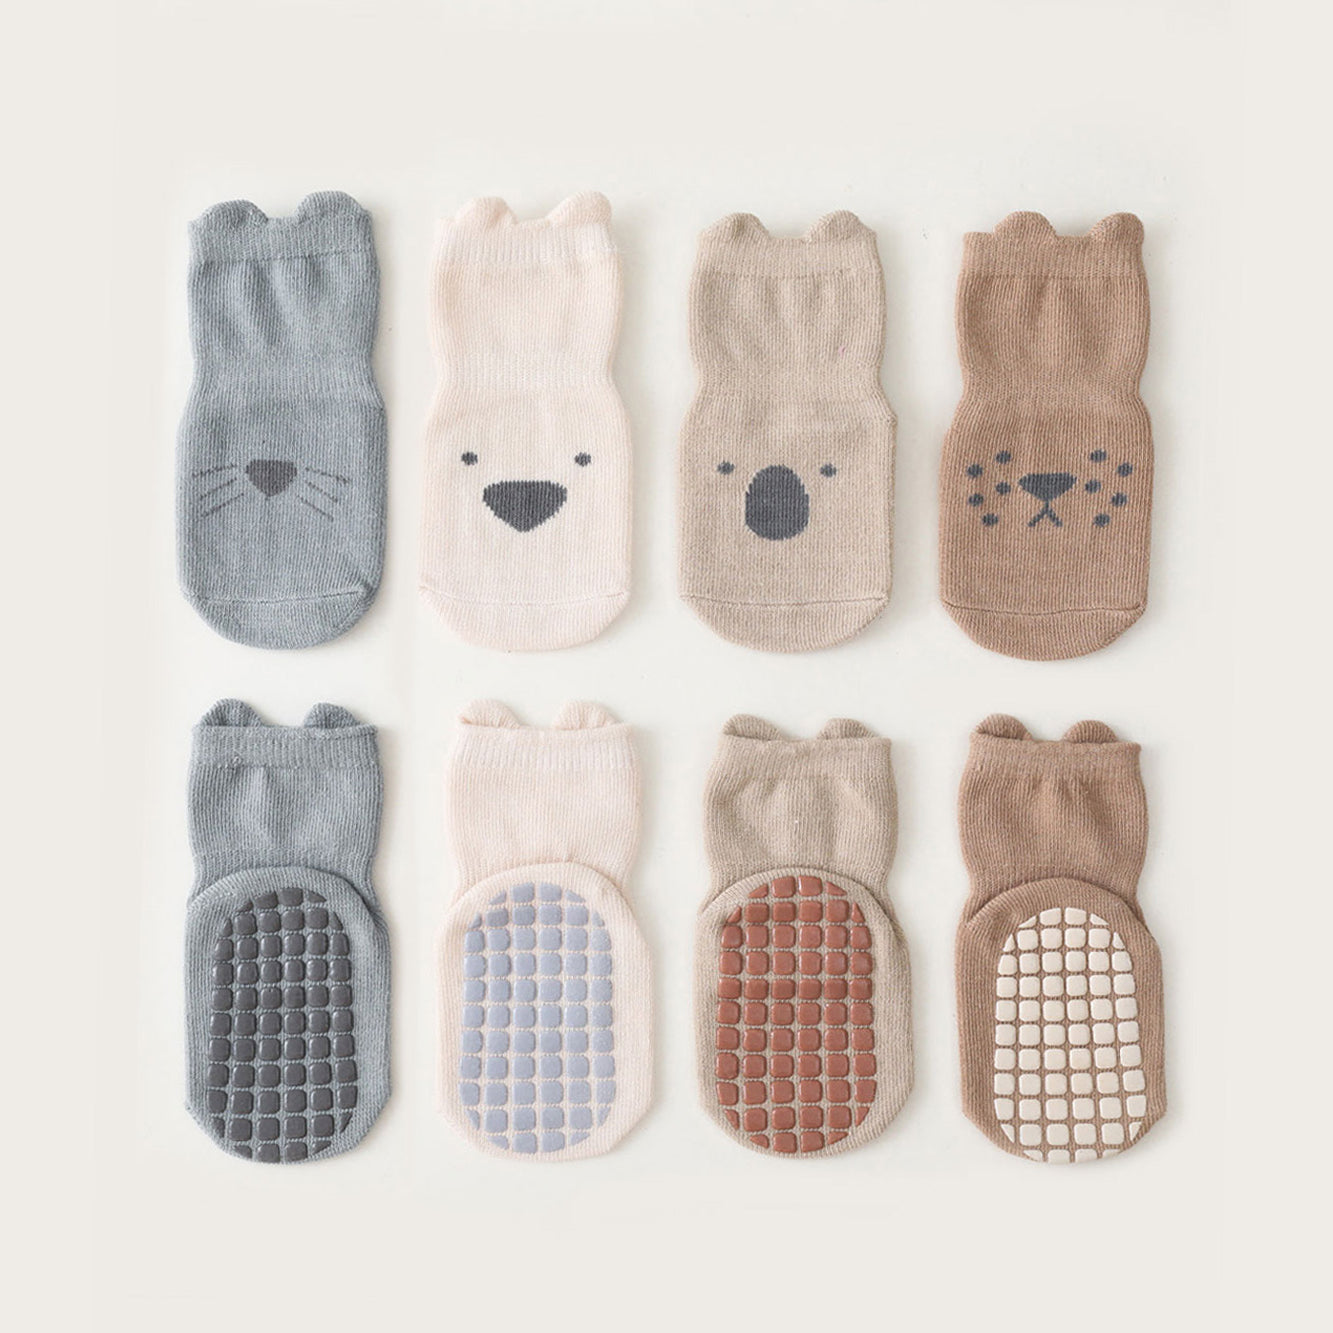 Into The Wild - 4 Pairs of Stay-On Baby & Toddler Non-Slip Socks